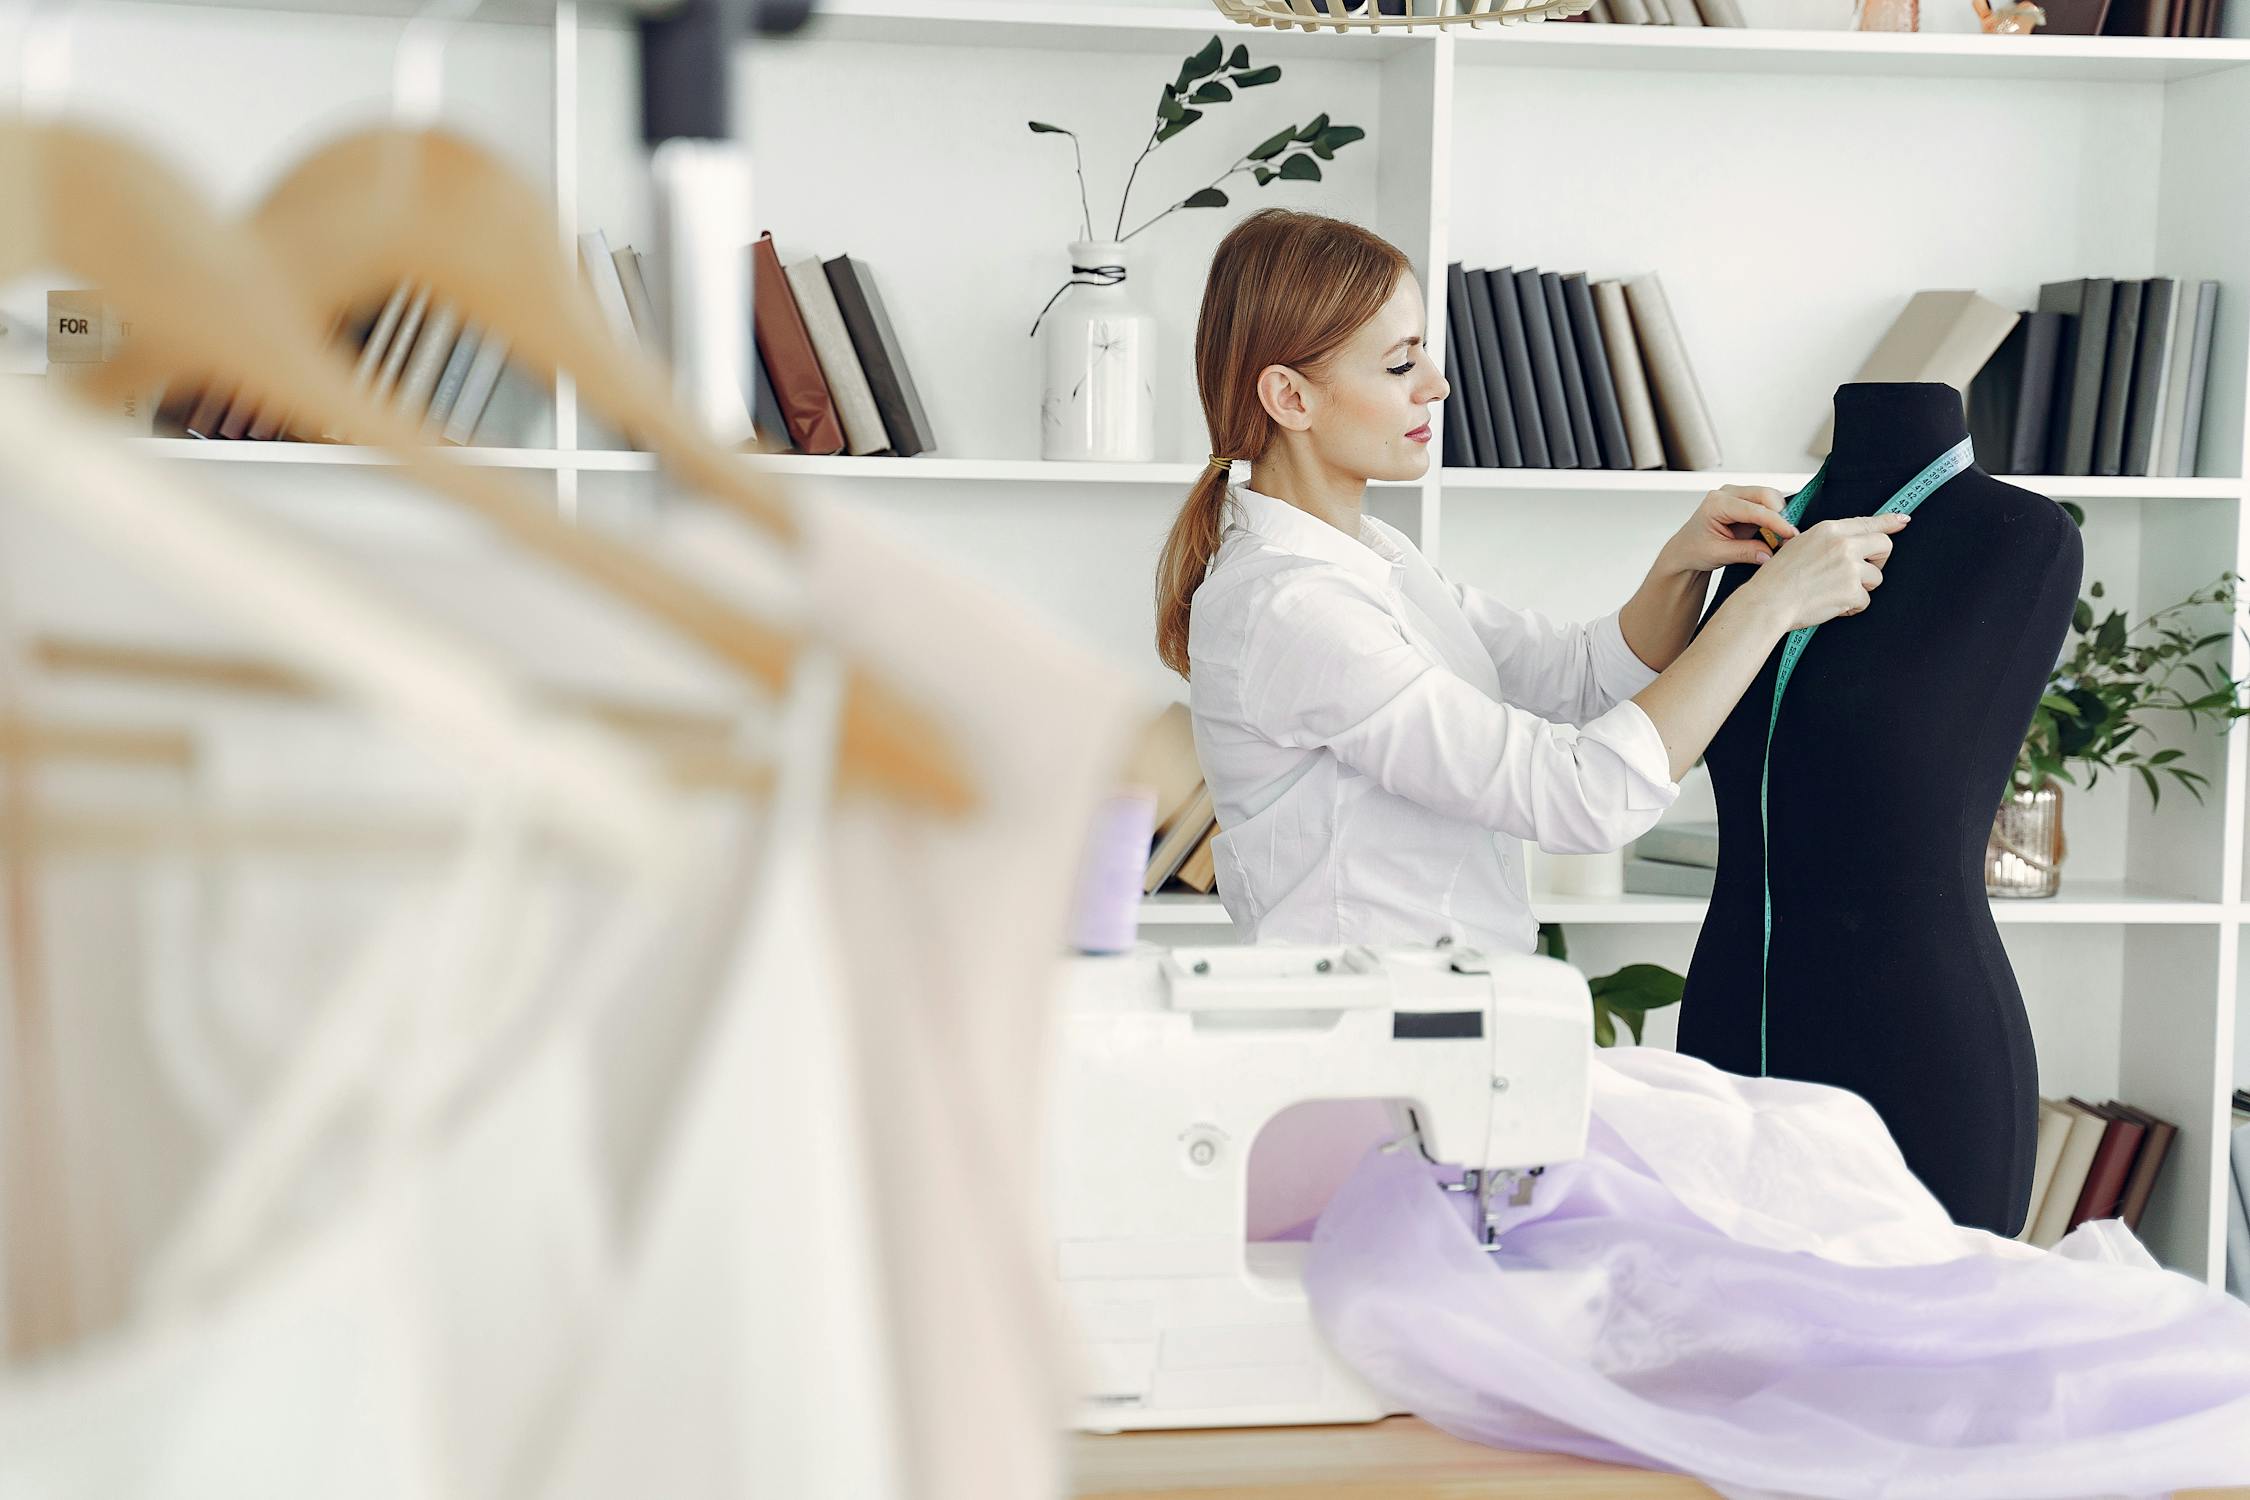 Revenue Growth Opportunities for Fashion Designers